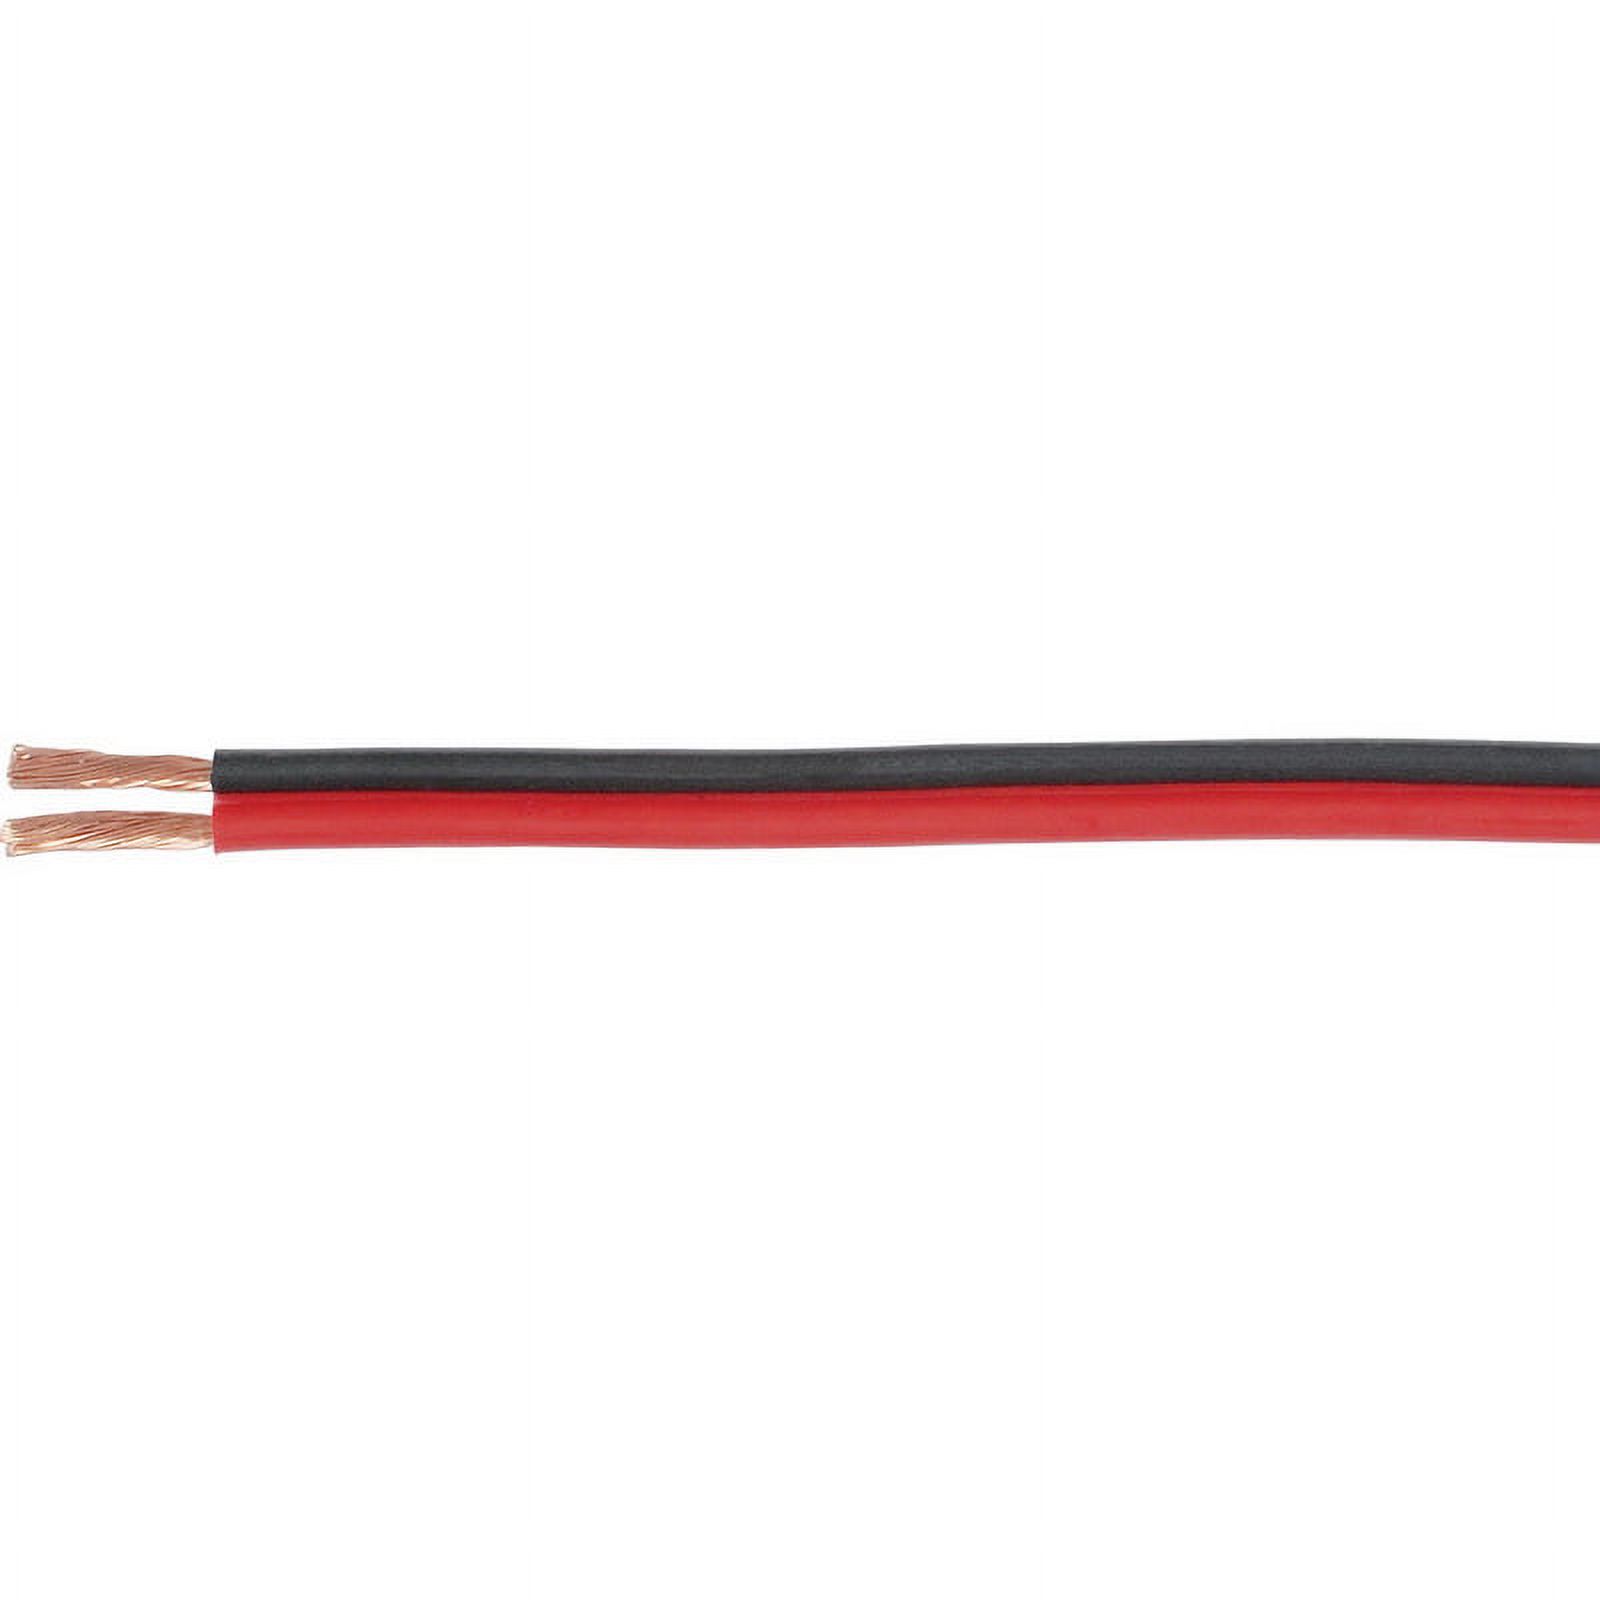 Parts Express Power/Speaker Zip Cord Wire Bare Copper Strands 12 AWG 2-conductor 100 ft. (Red/Black) - image 1 of 1